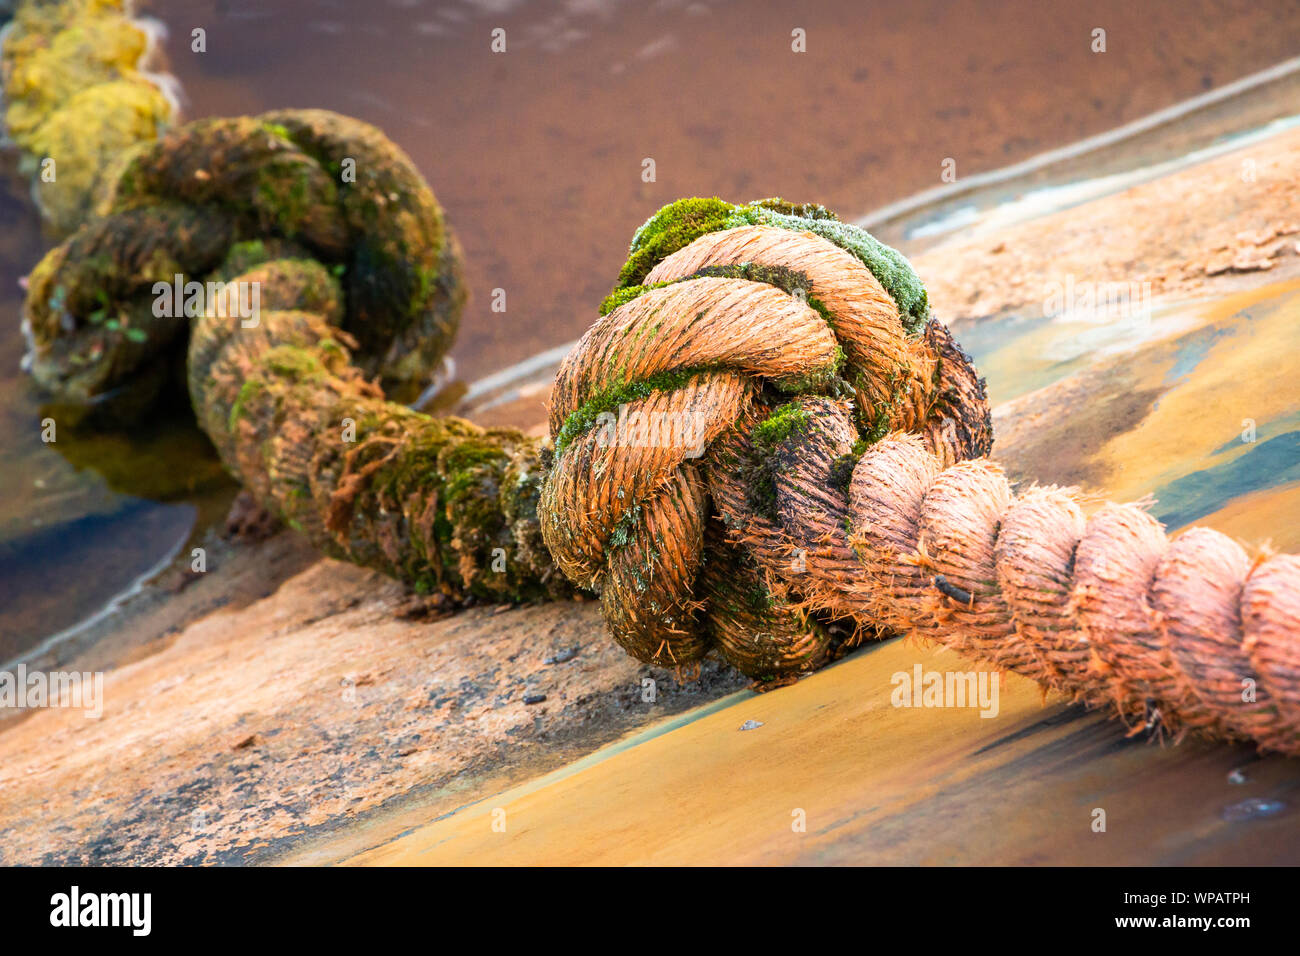 Thick orange nylon rope with knots to secure boats and ships in the harbor at the dock Stock Photo